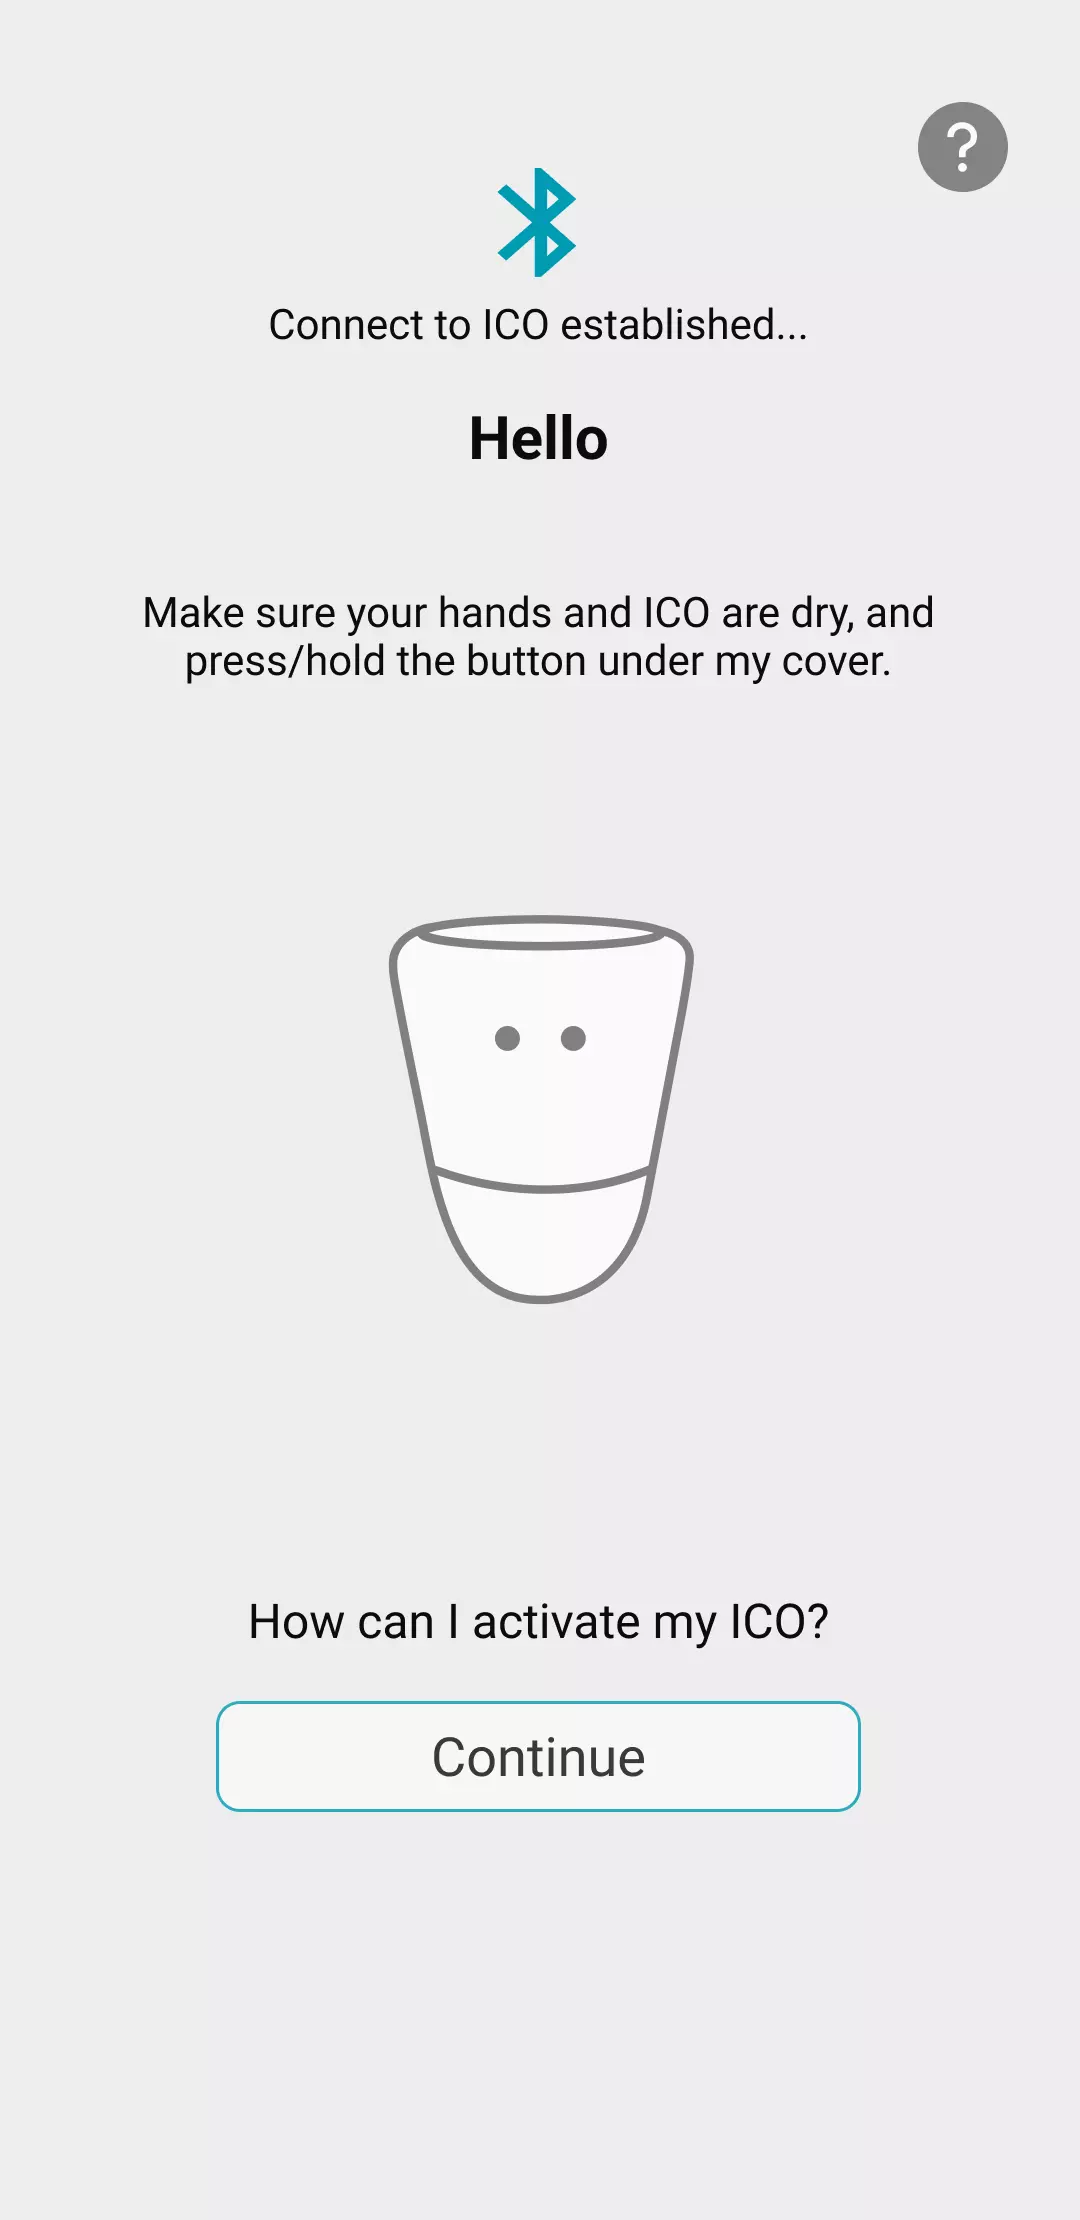 Visual of the ICO application with description and procedure for switching on and connecting ICO